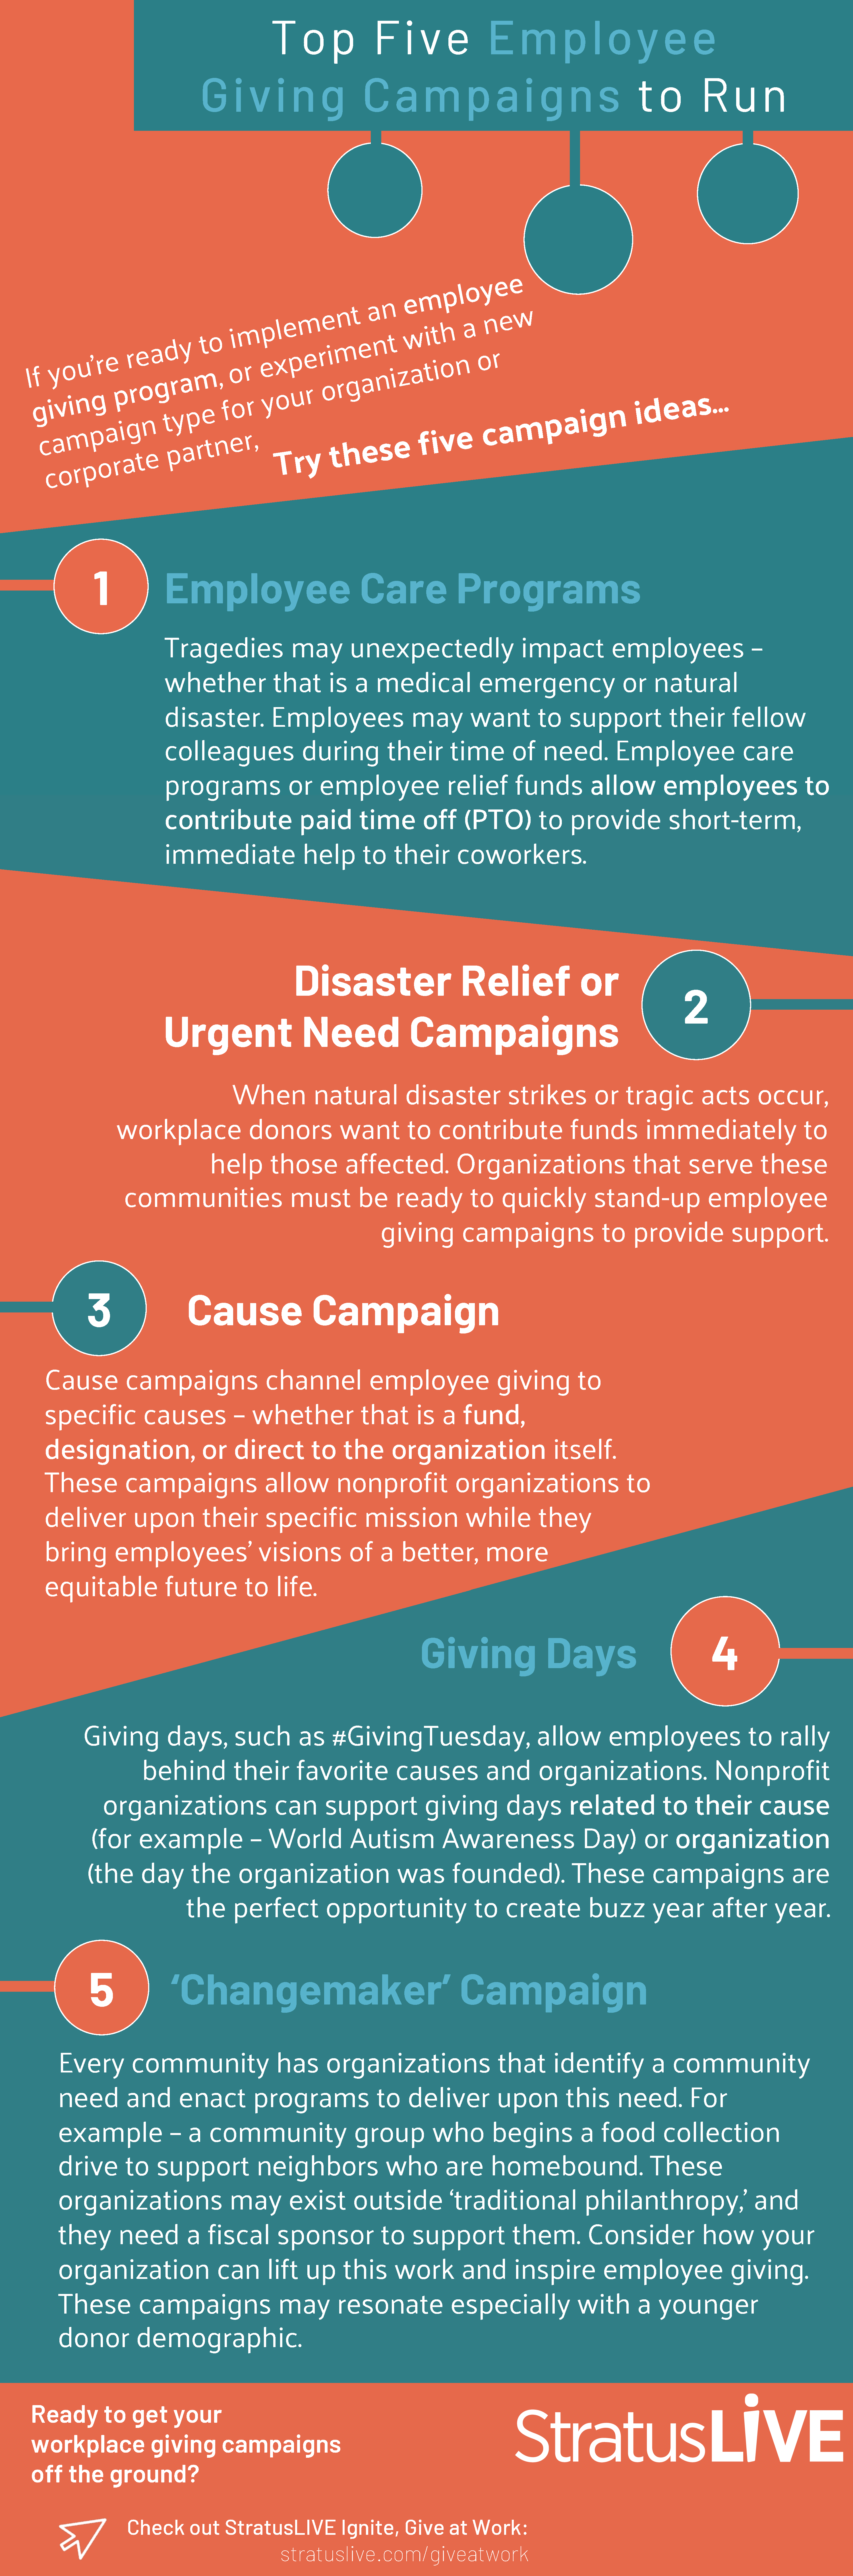 Top 5 Employee Giving Campaigns to Run